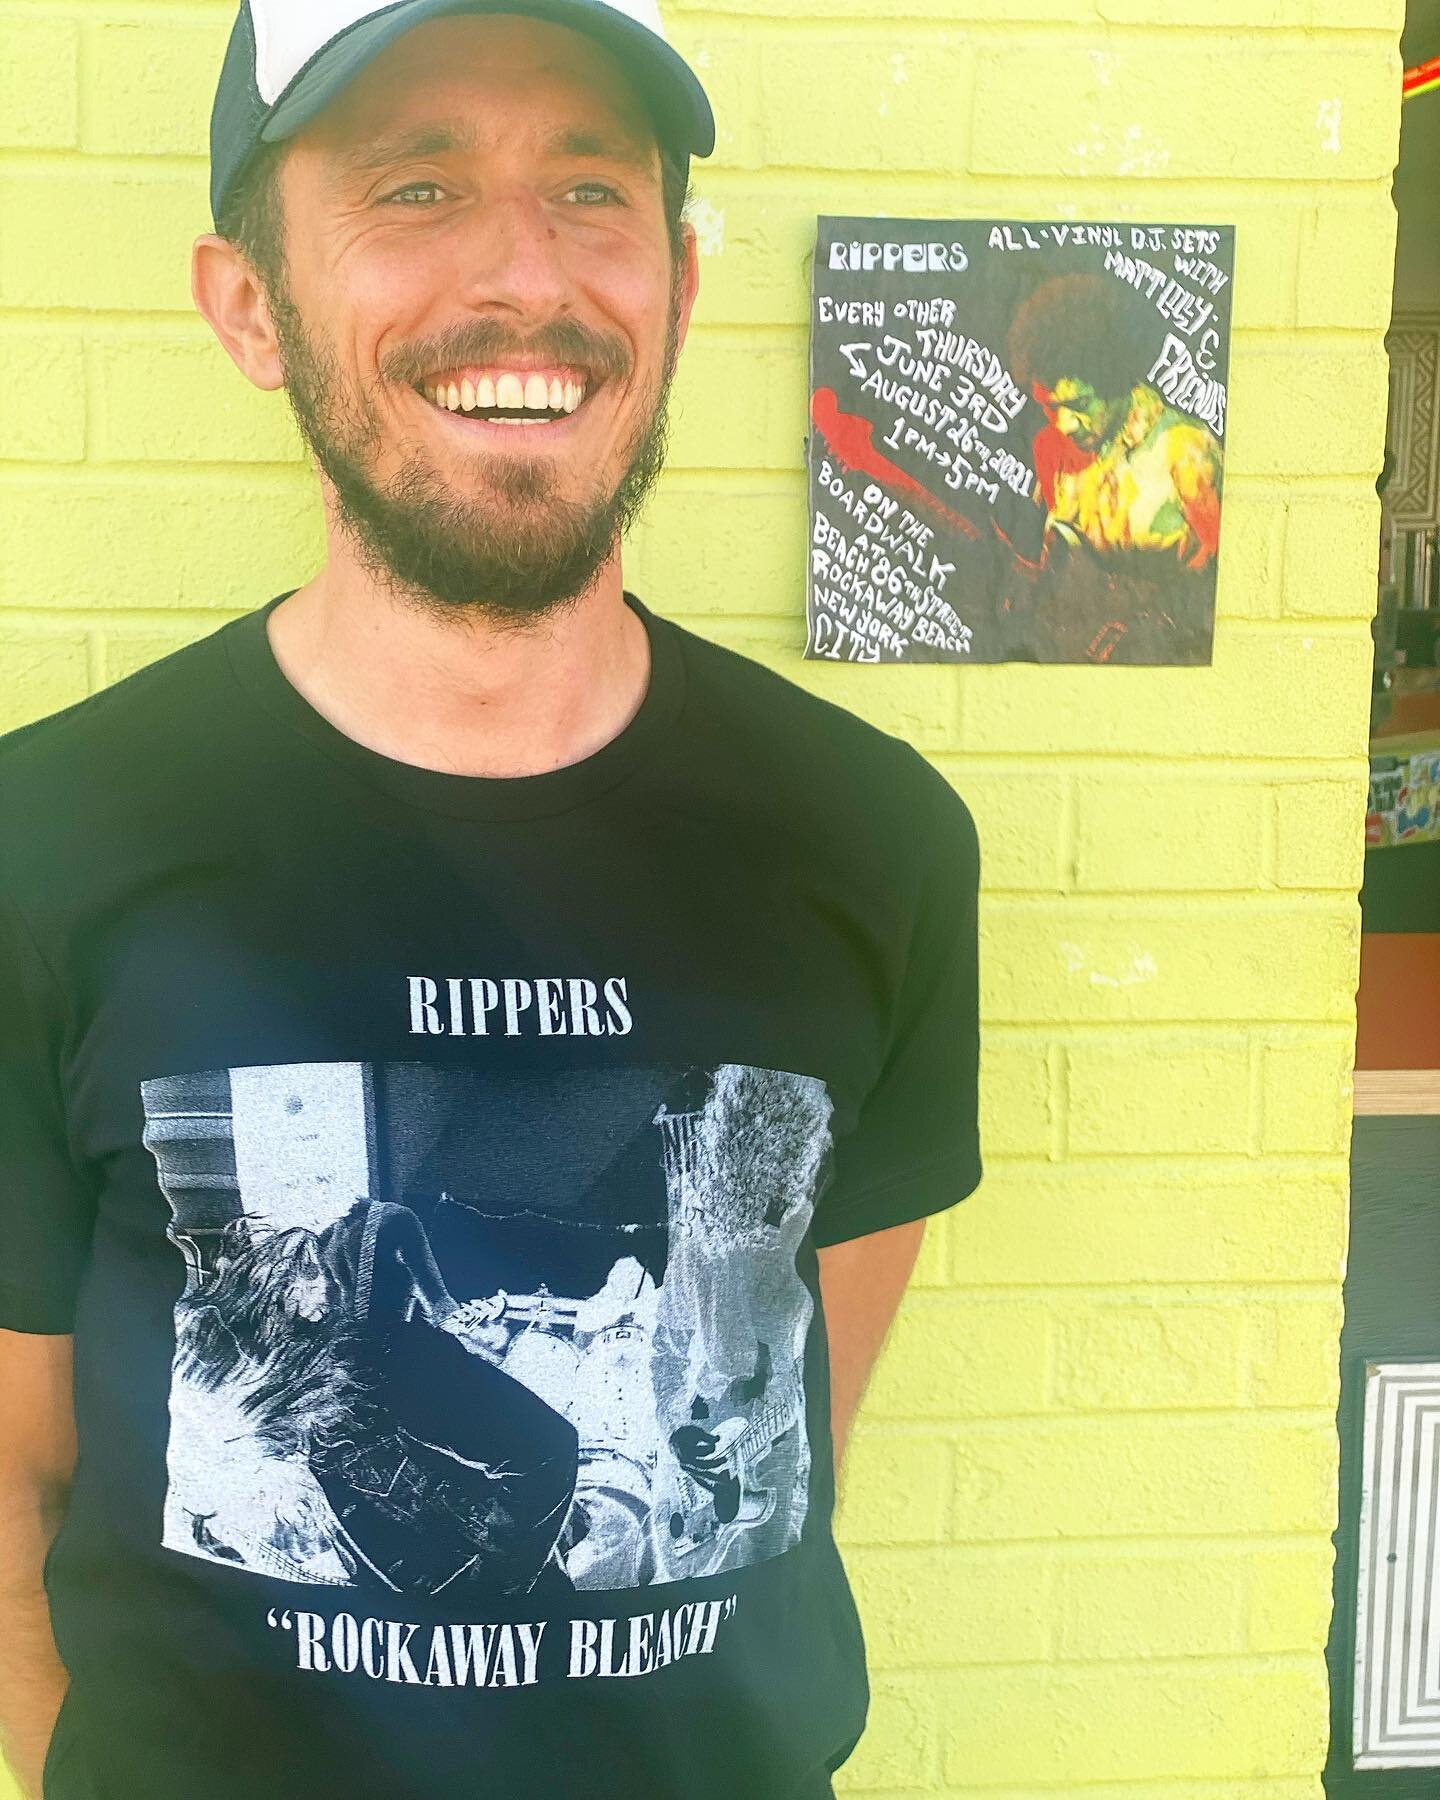 #mattlilly spinning vinyl tomorrow and slinging these shirts he made with Carousel&rsquo;s Press. Come snag some tunes and a shirt while they last! 1-5pm
#mattlillyoninstagram #mattlillydoesntuseinternet